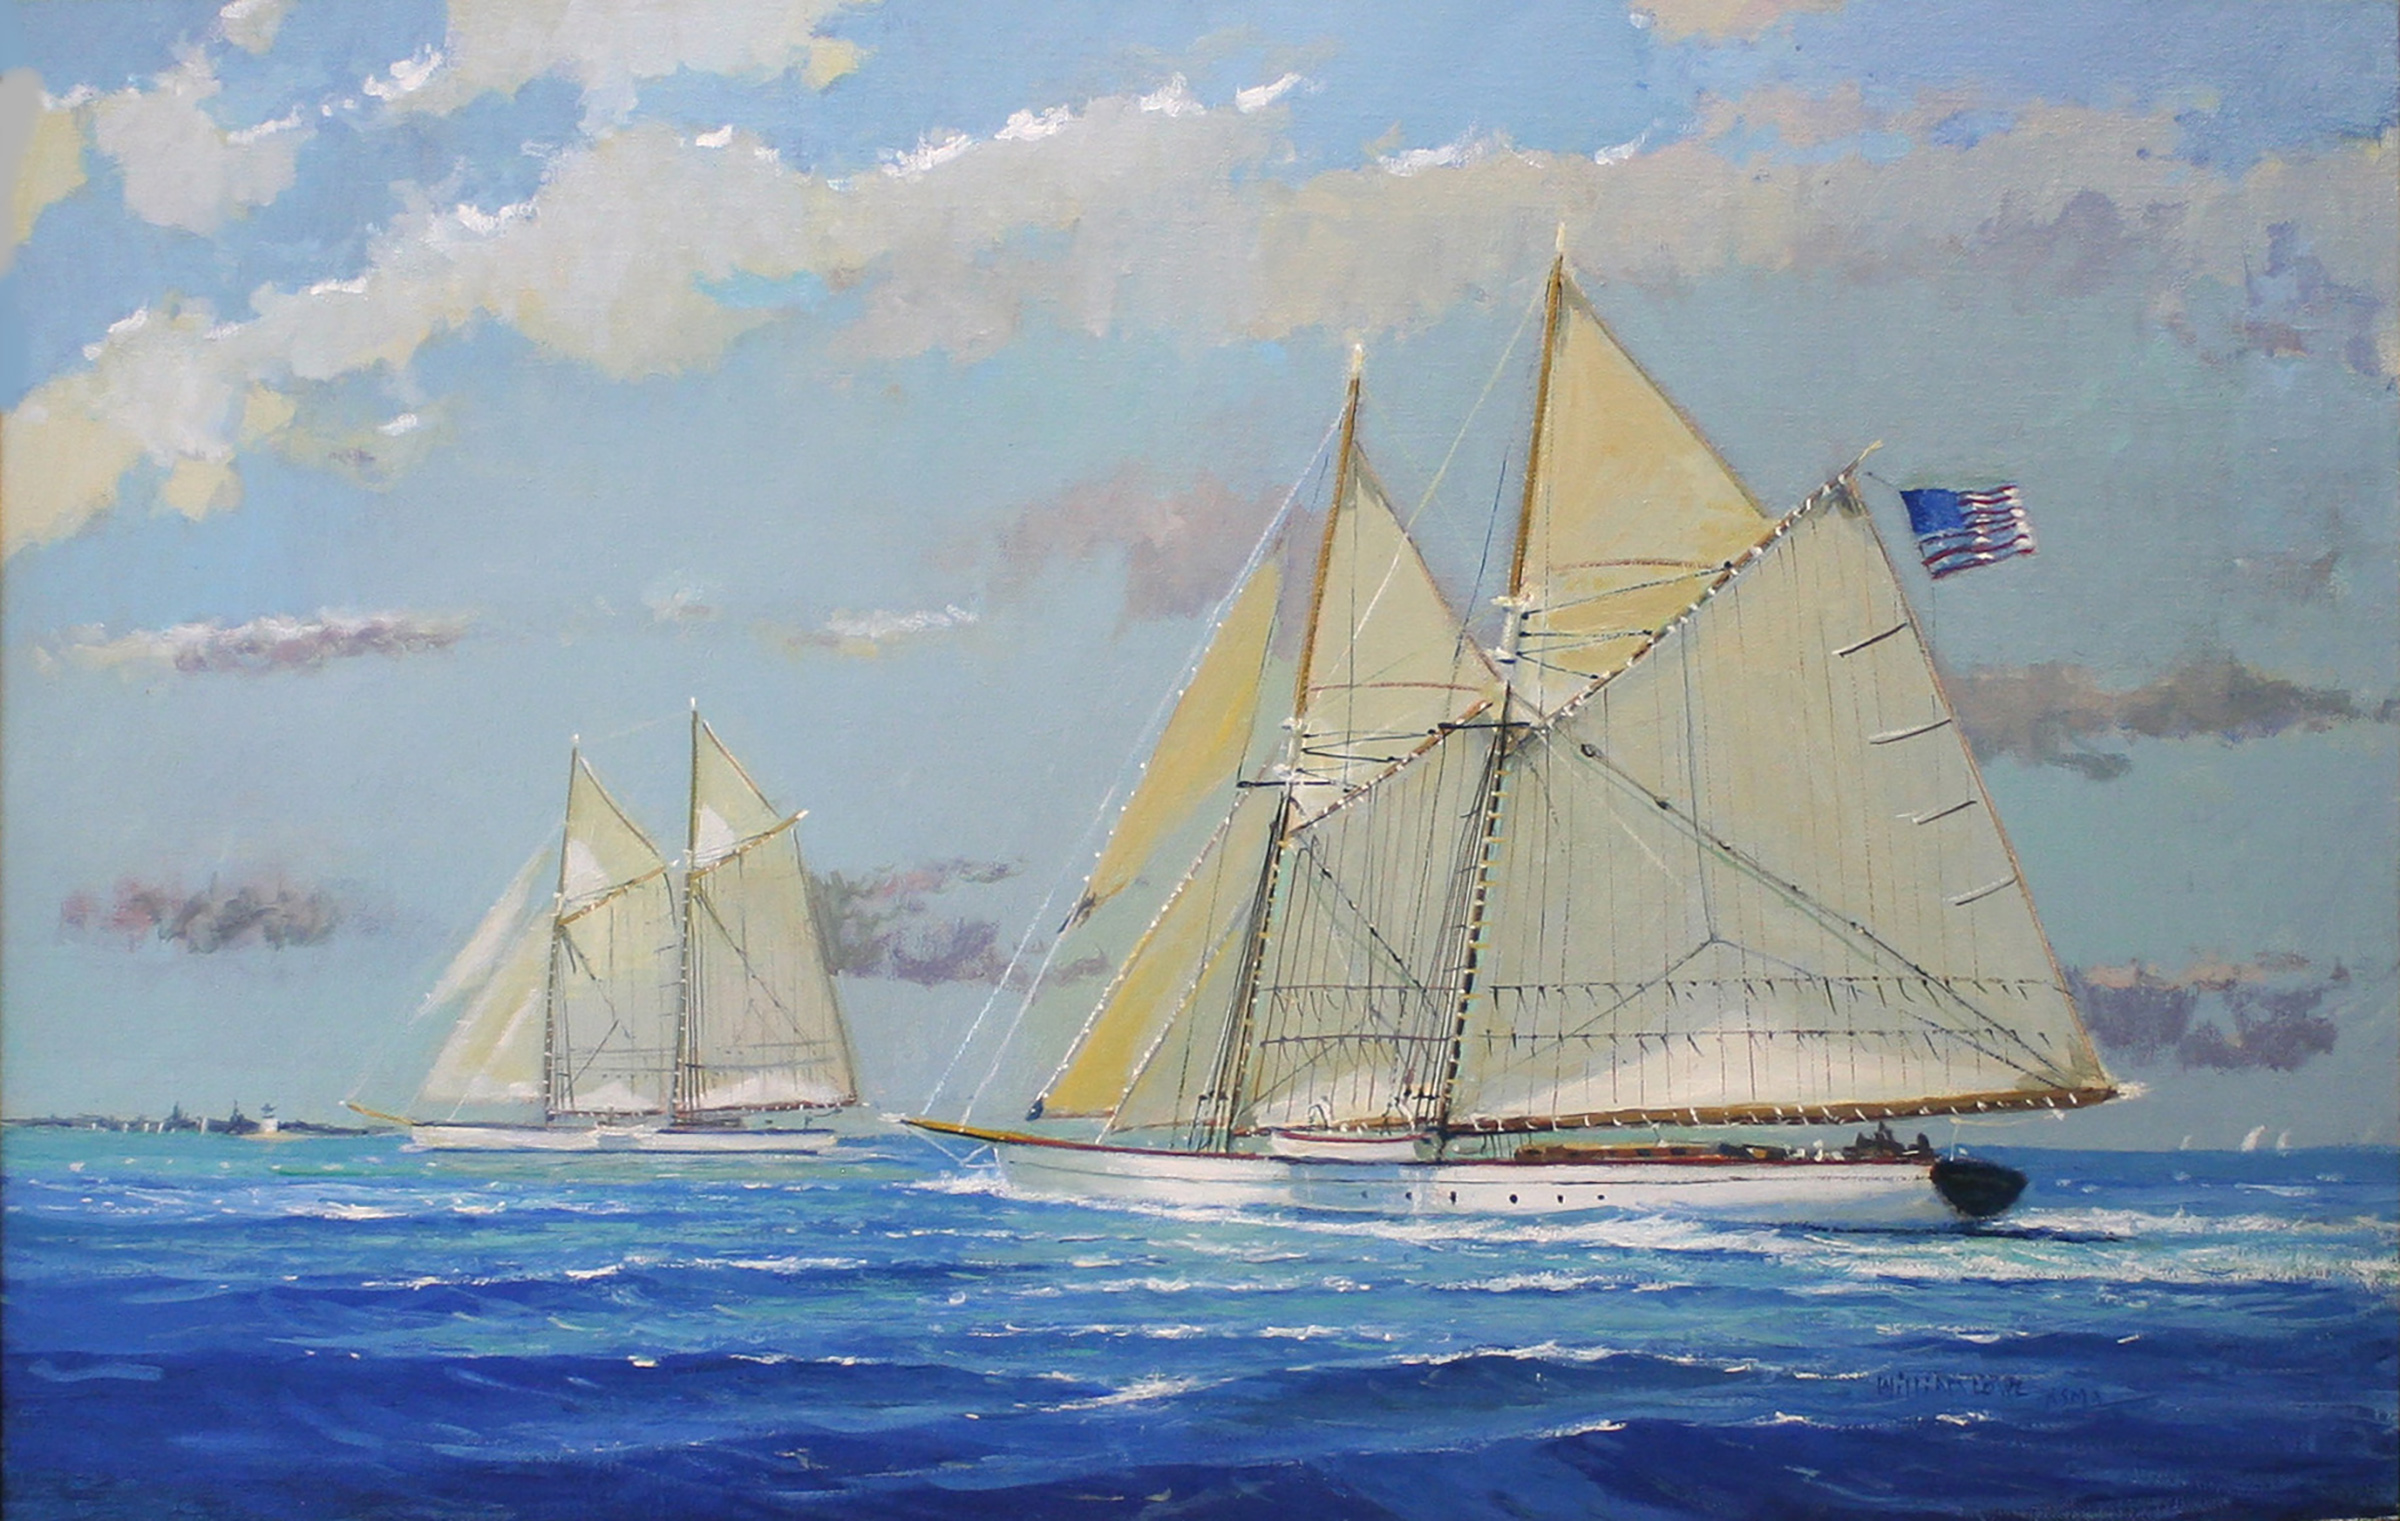 William Lowe Oil on Linen “Sailing Back to Nantucket Harbor”